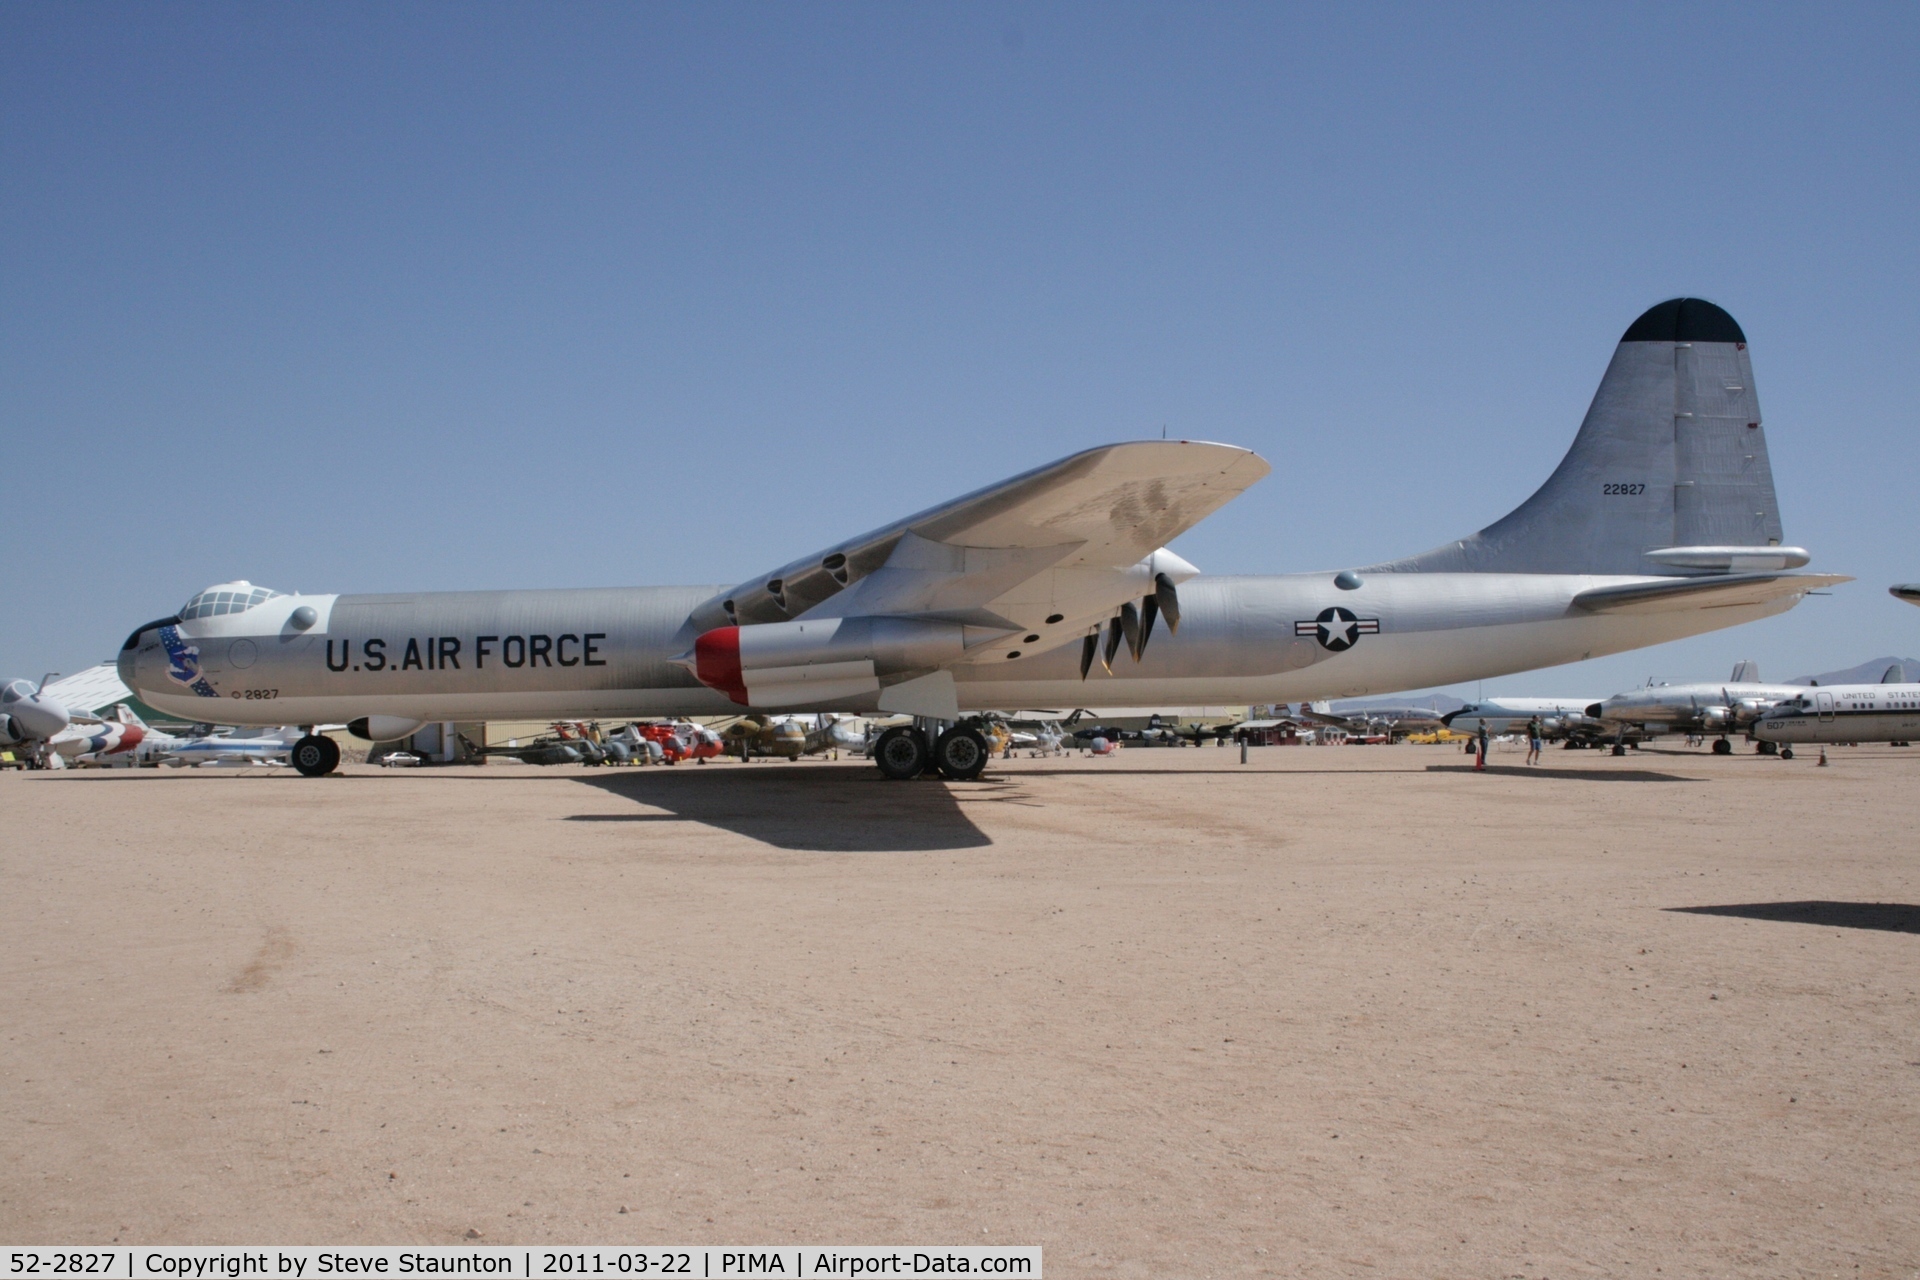 52-2827, 1952 Convair B-36J-10-CF Peacemaker C/N 383, Taken at Pima Air and Space Museum, in March 2011 whilst on an Aeroprint Aviation tour